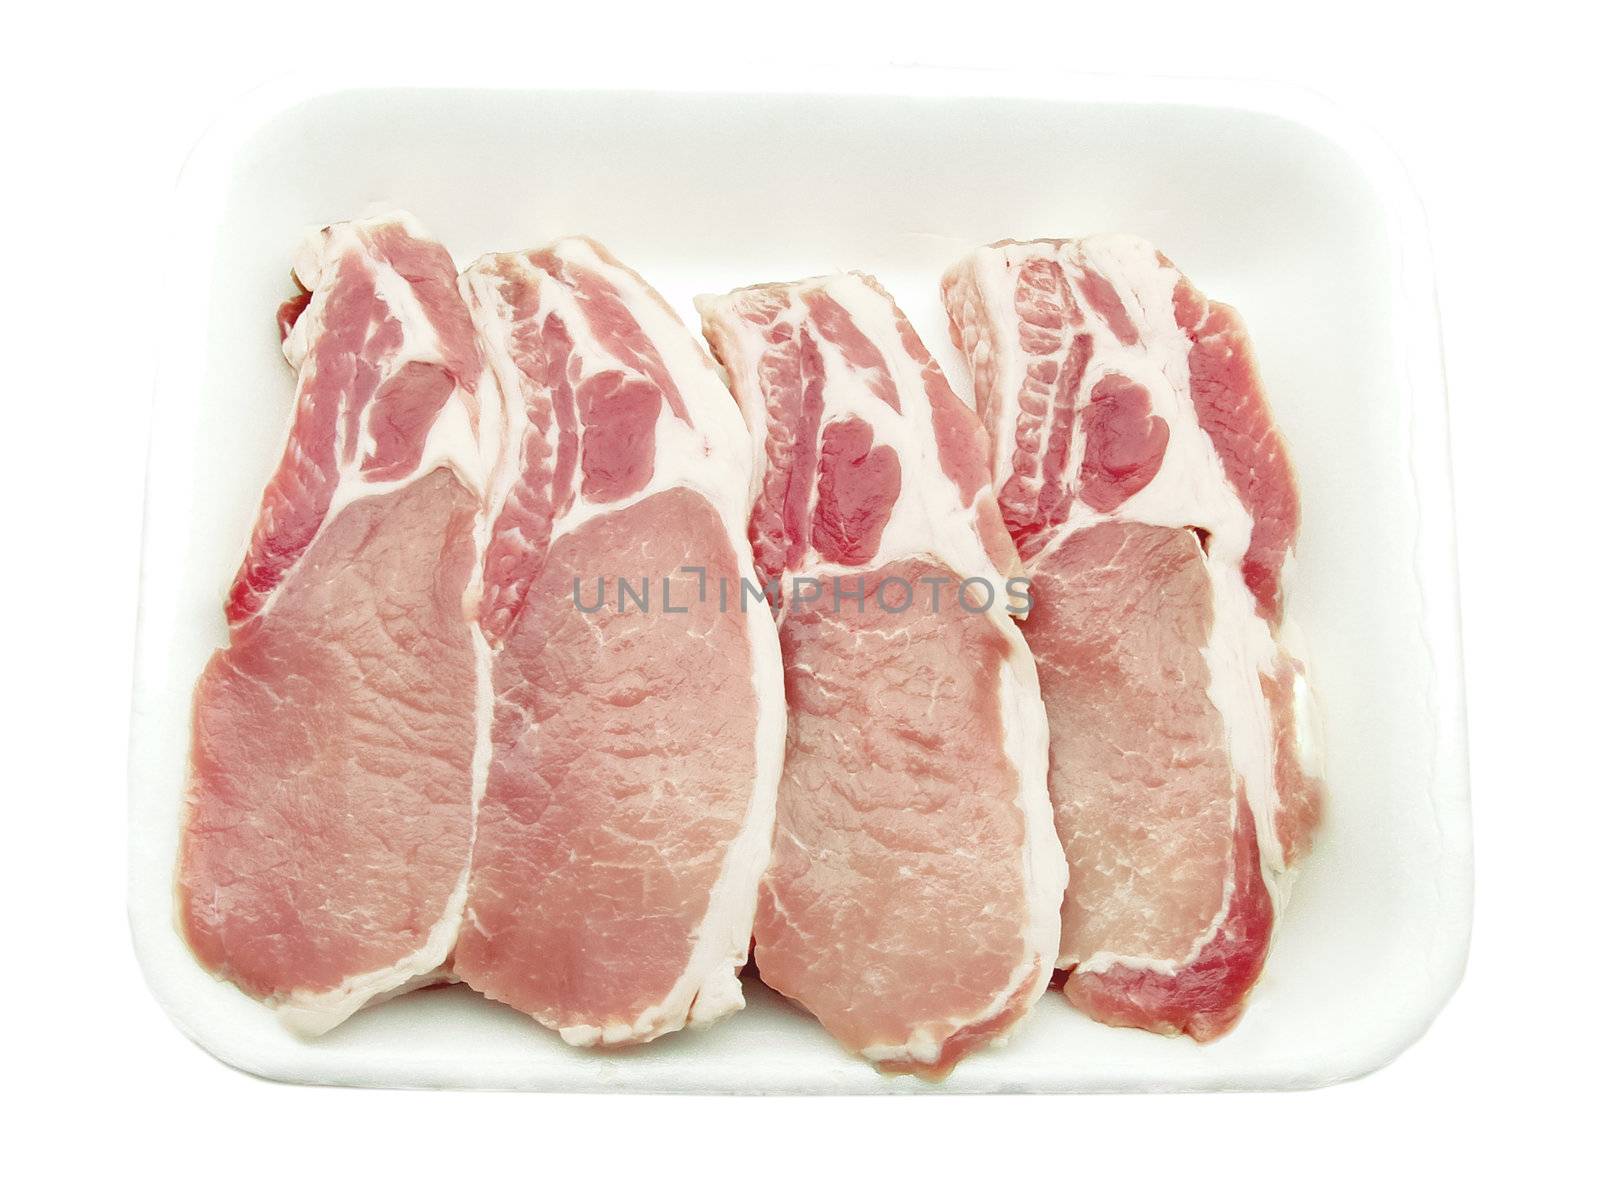 Pork chops packed in a container by NickNick